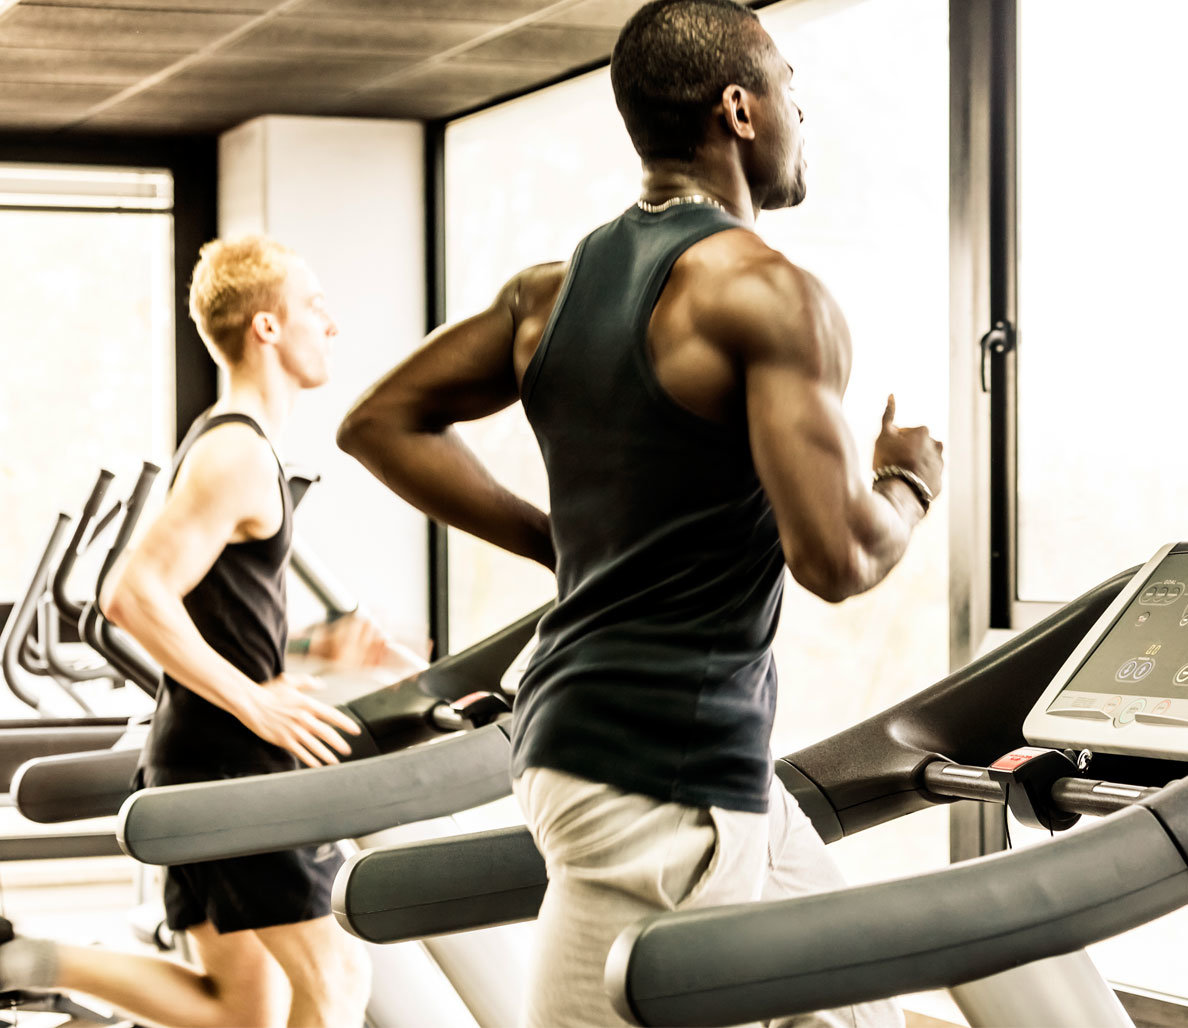 top 5 treadmill exercise tips for beginners